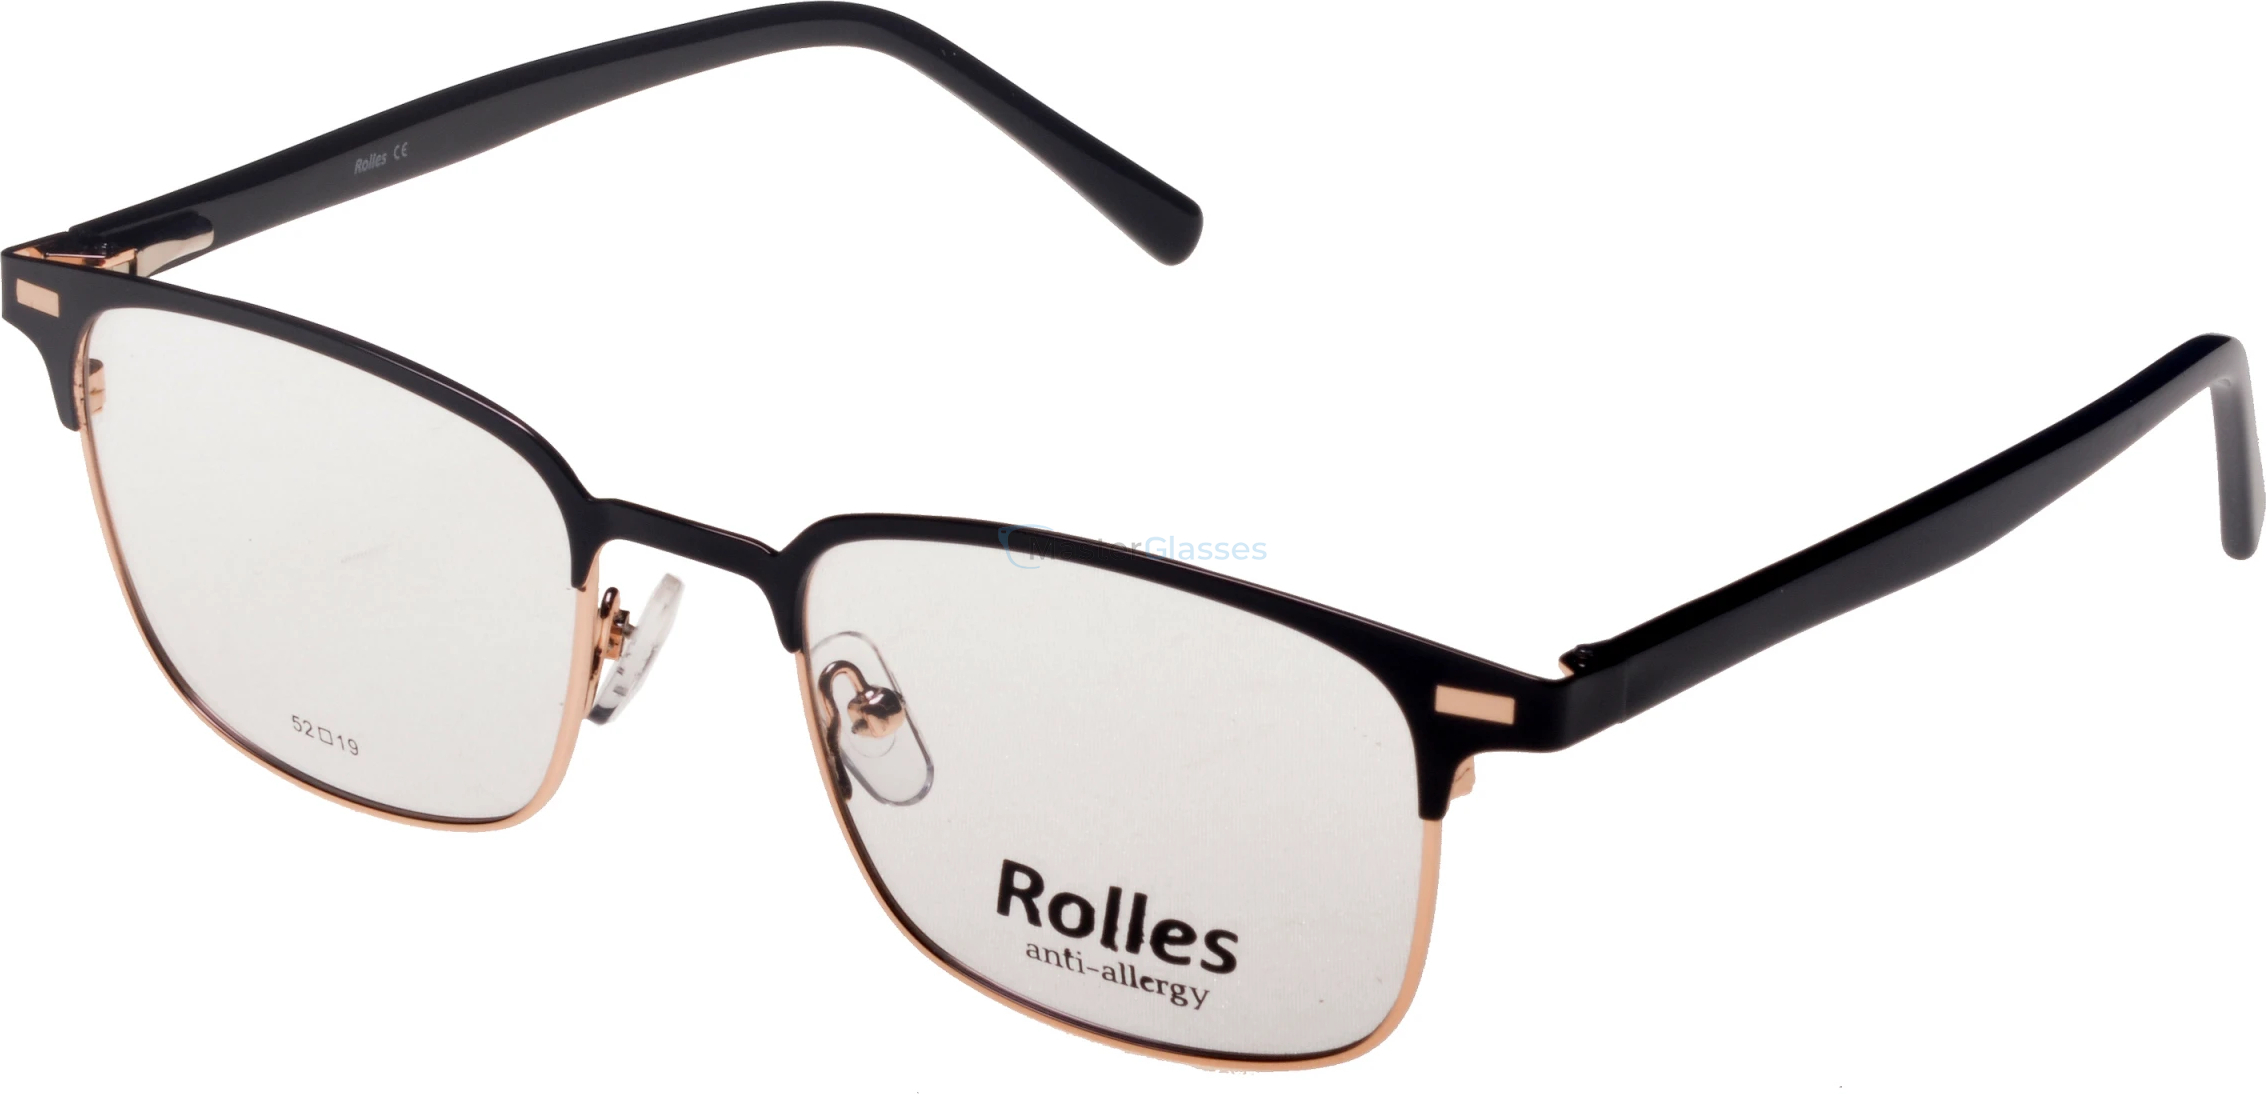  Rolles 705 02